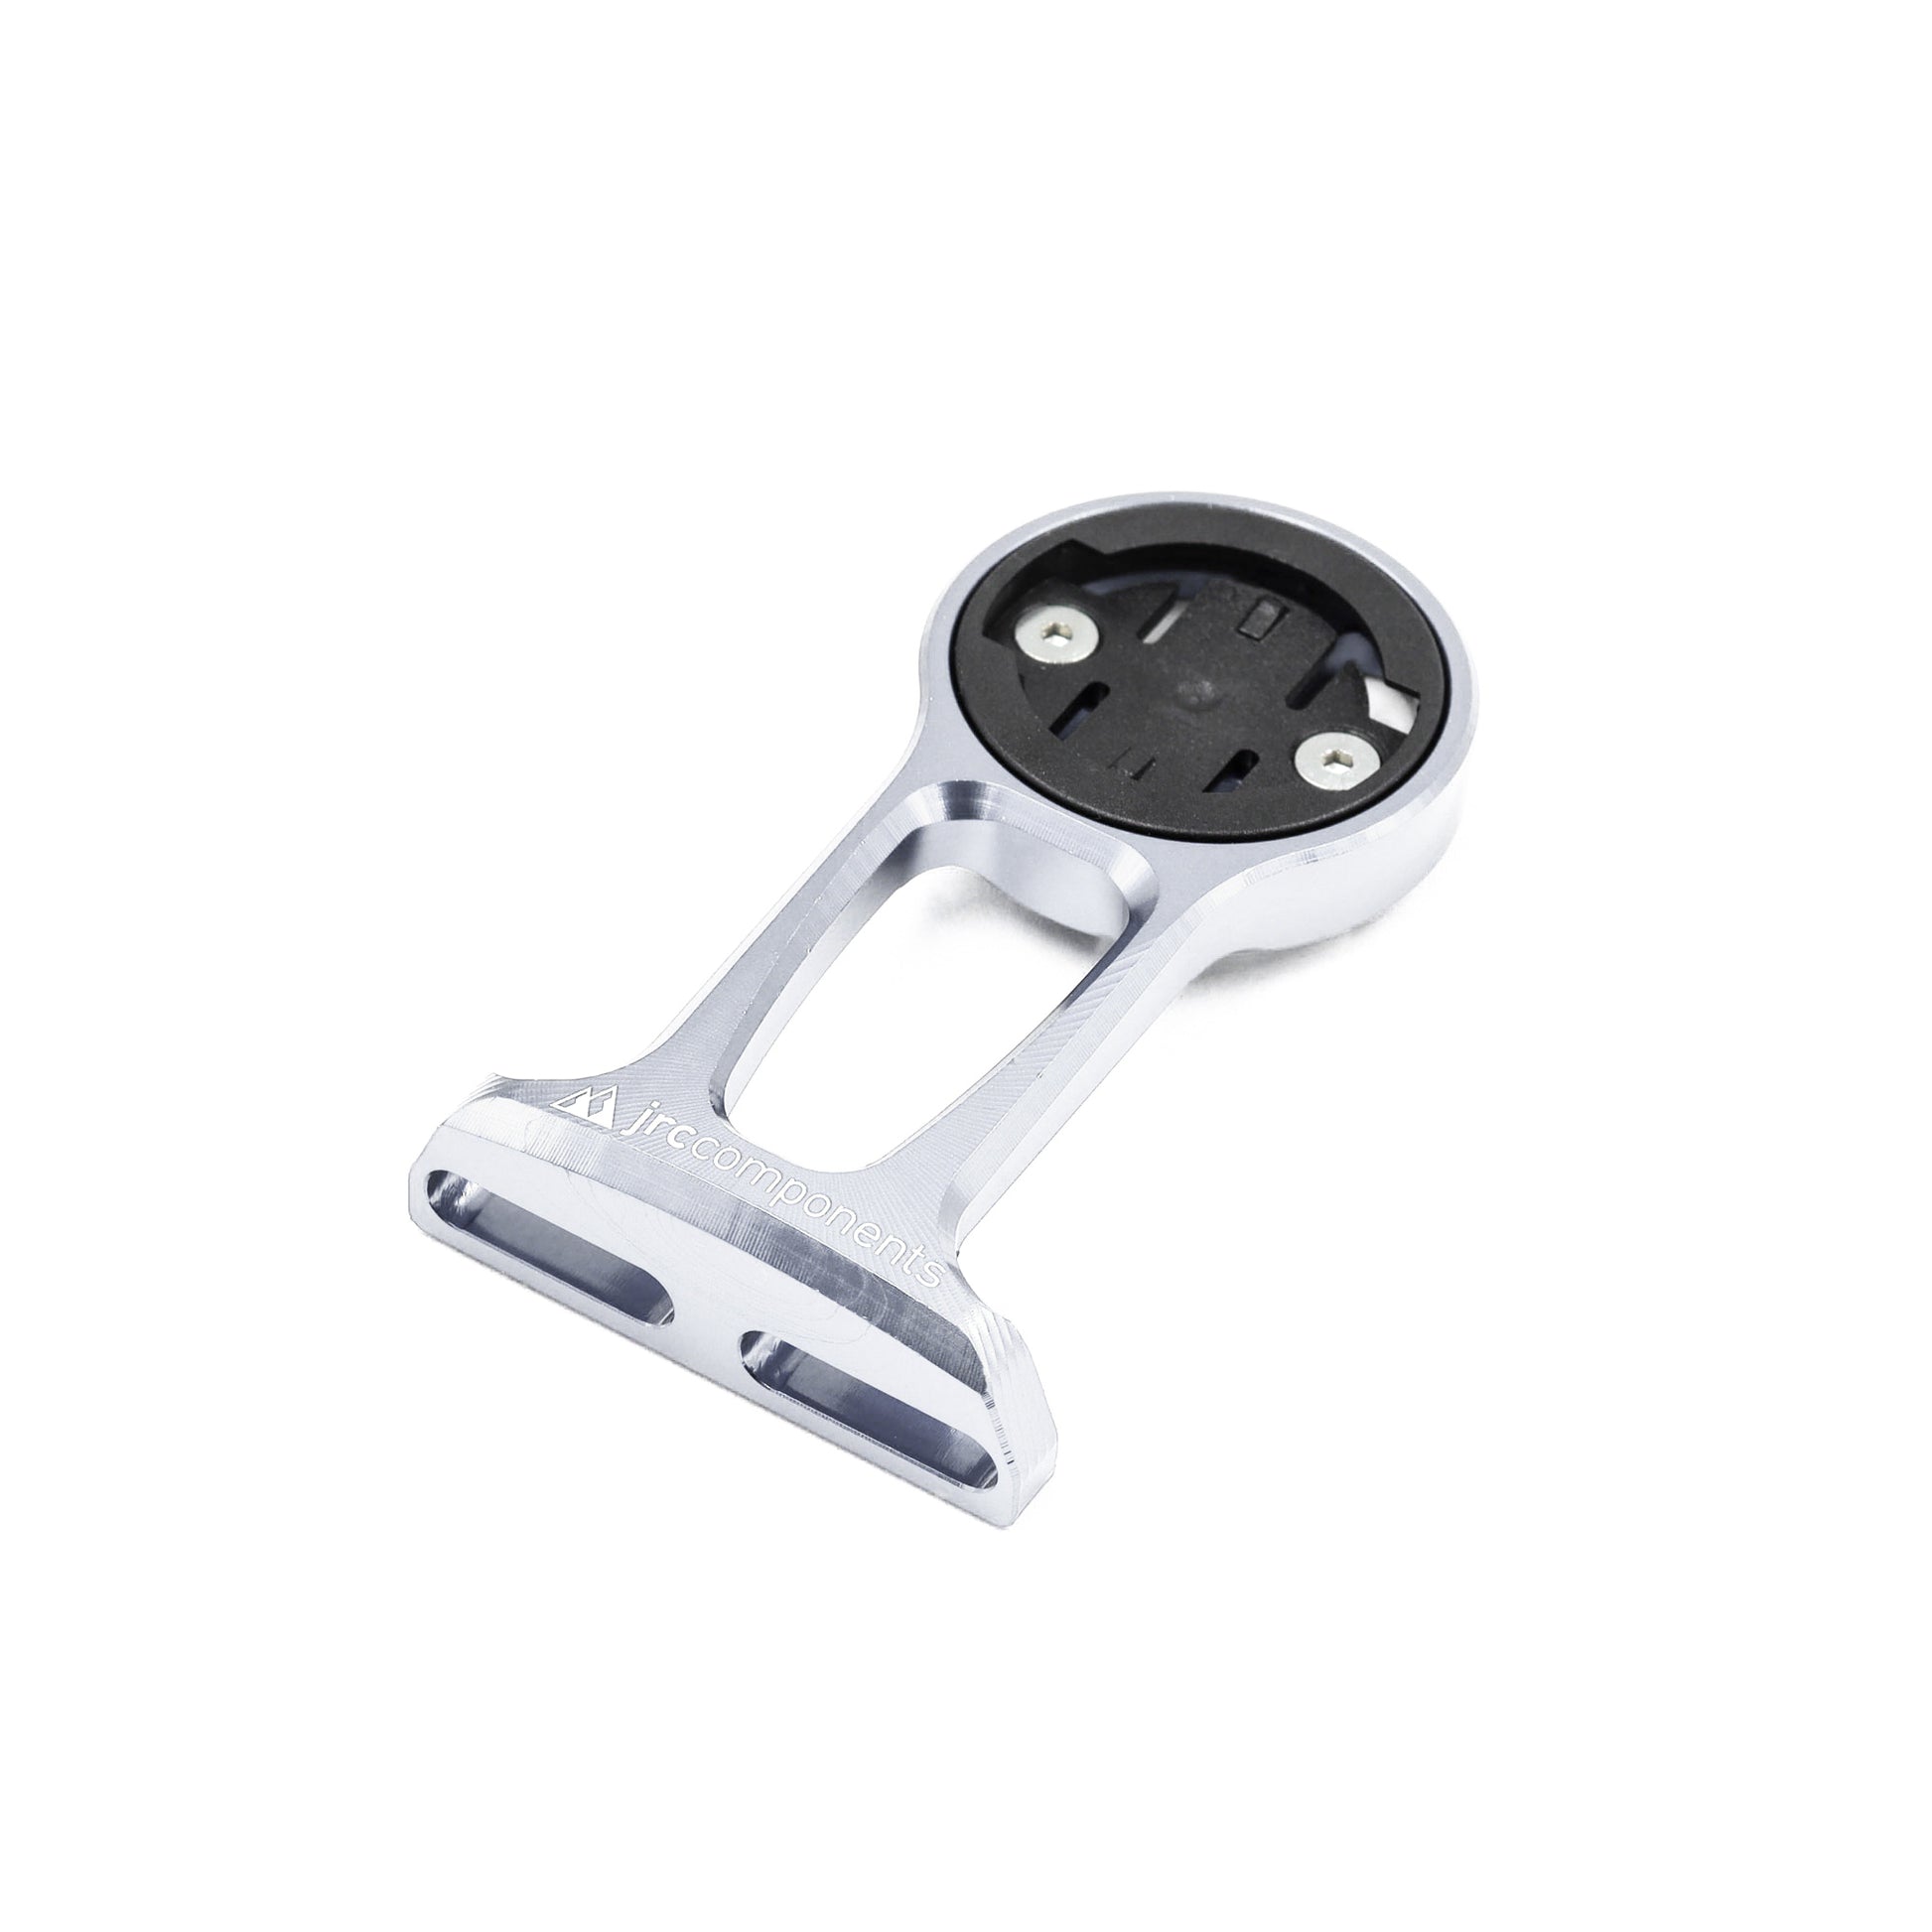 Silver, lightweight aluminium stem out front GPS computer mount for bicycle, compatible with Wahoo